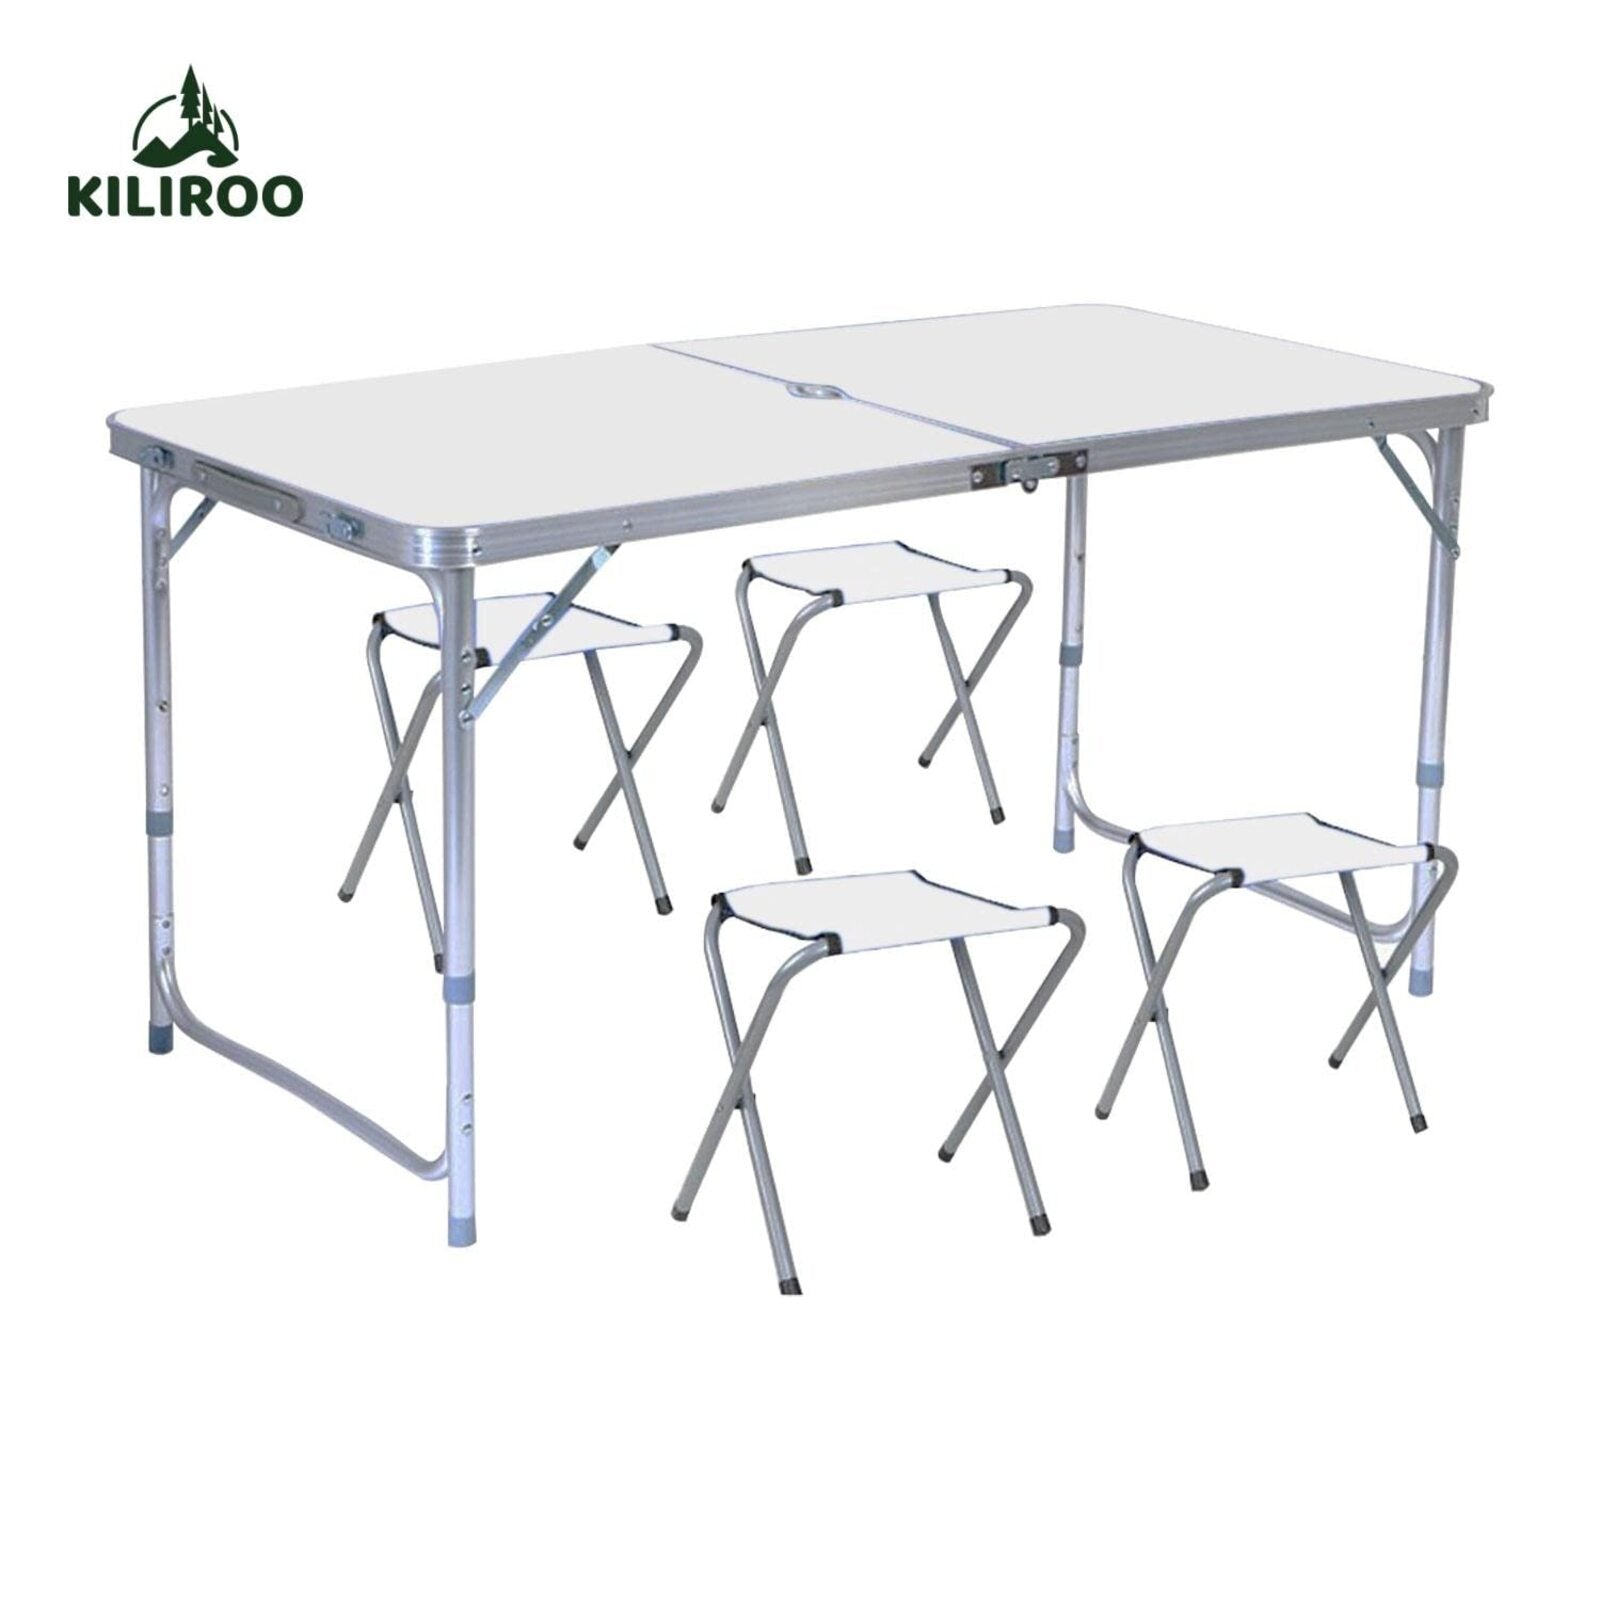 KILIROO Camping Table 120cm Silver (With 4 Chair)